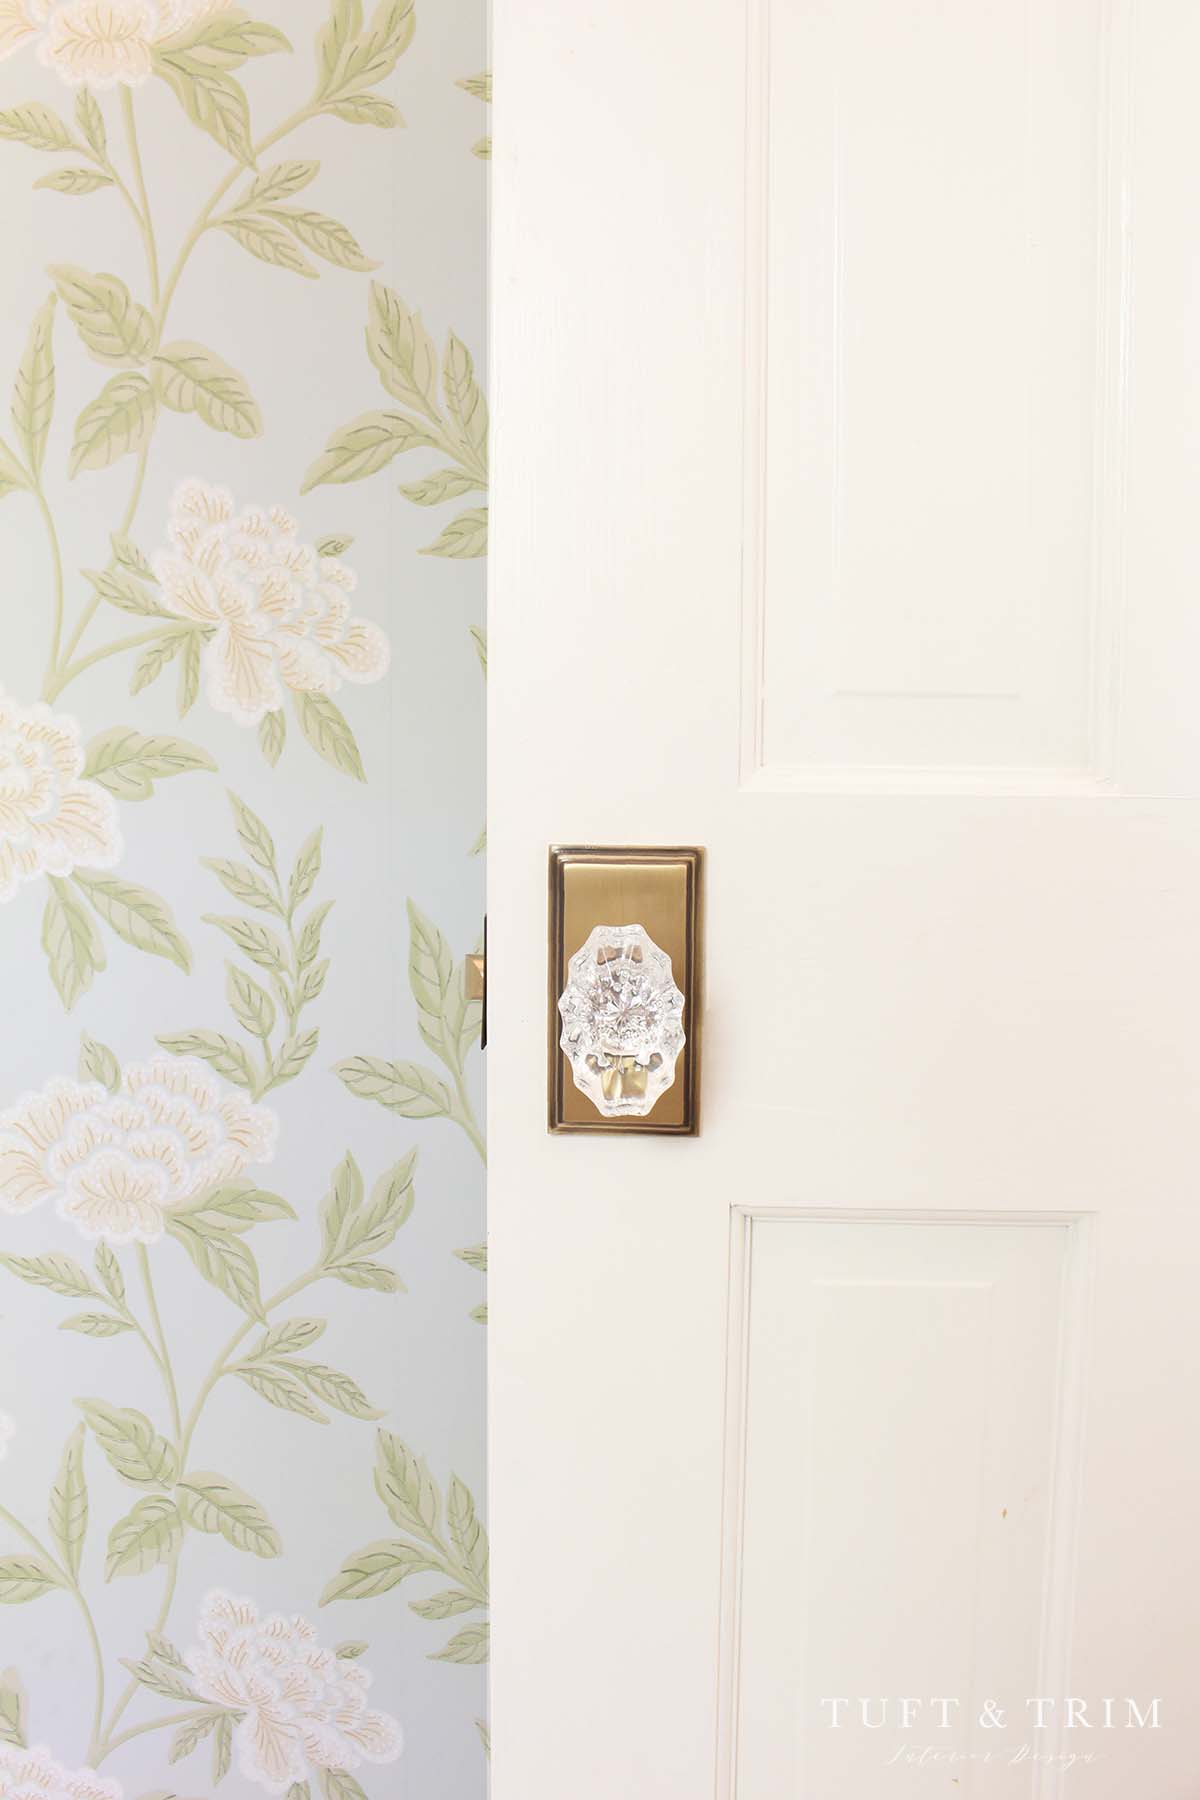 Upgrading the Home with Classic Door Hardware with Tuft & Trim Interior Design